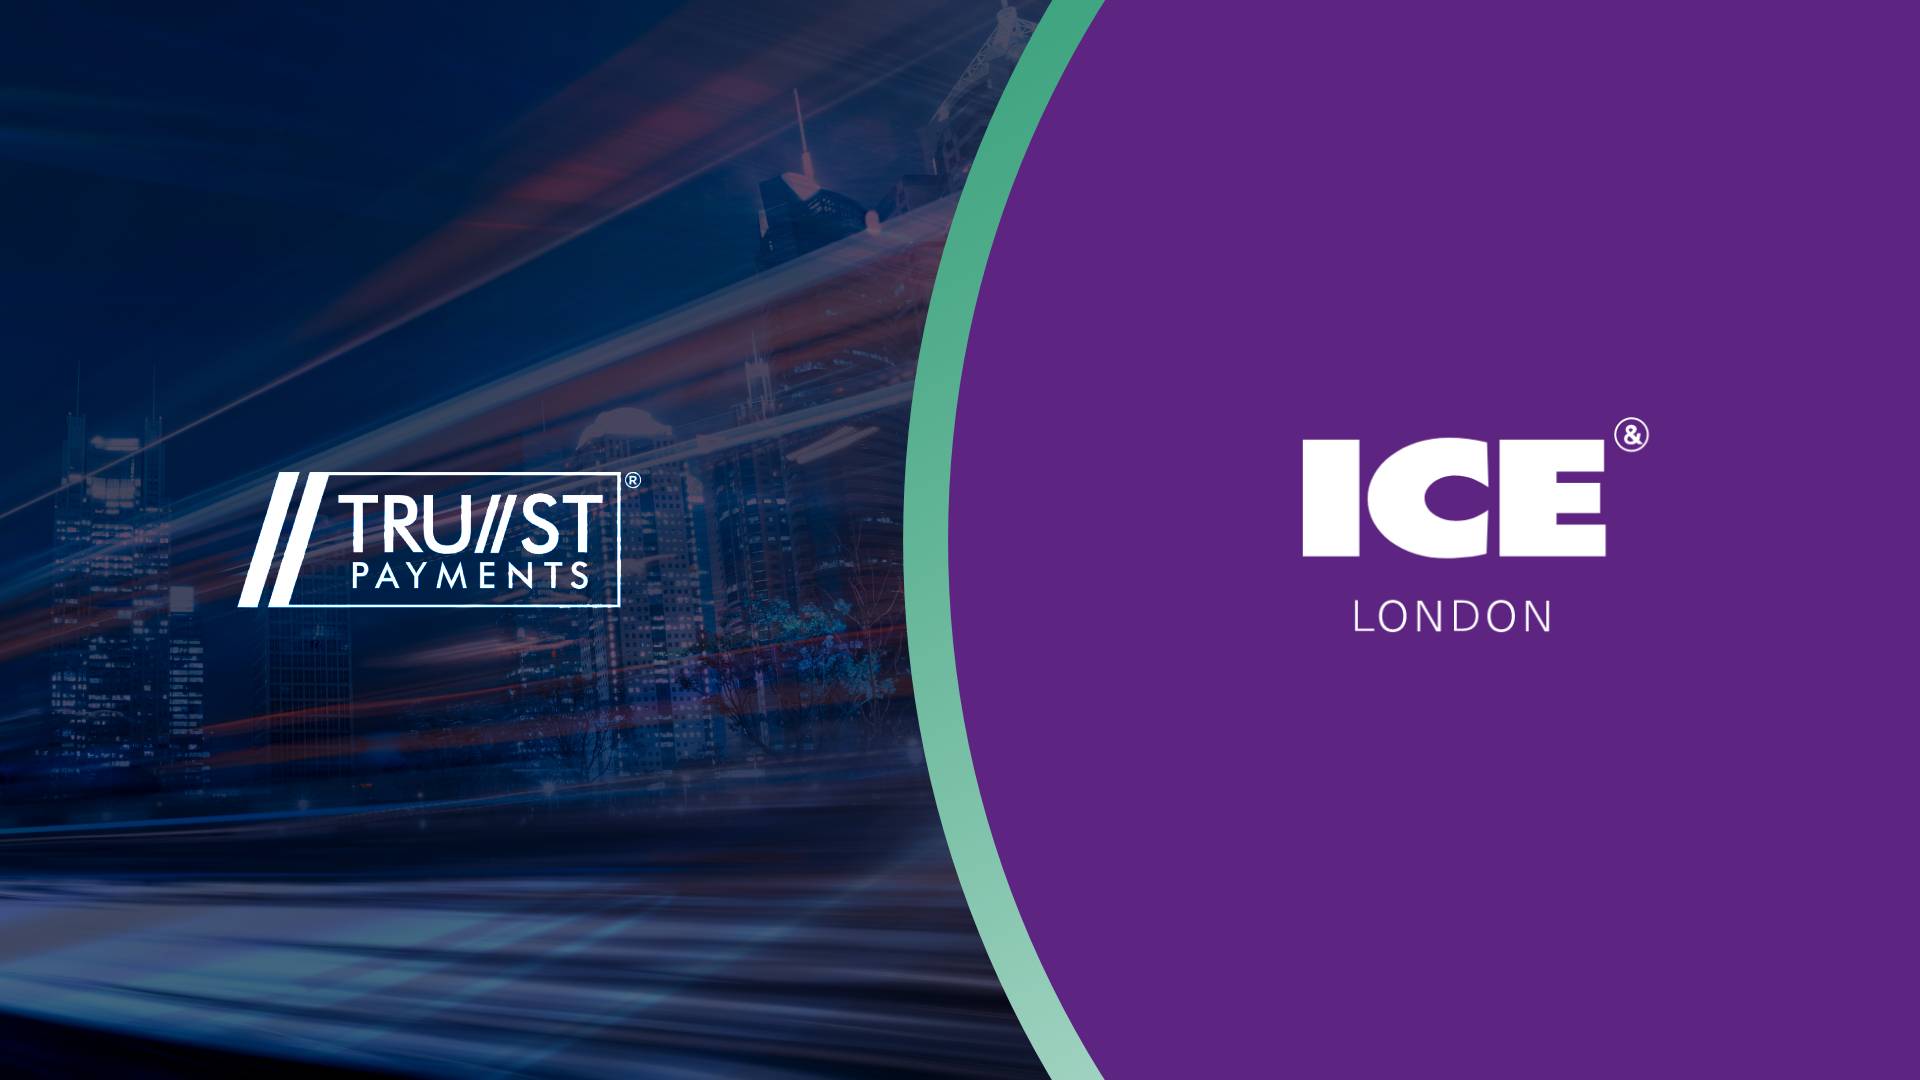 Meet the Trust Payments team at ICE London this week